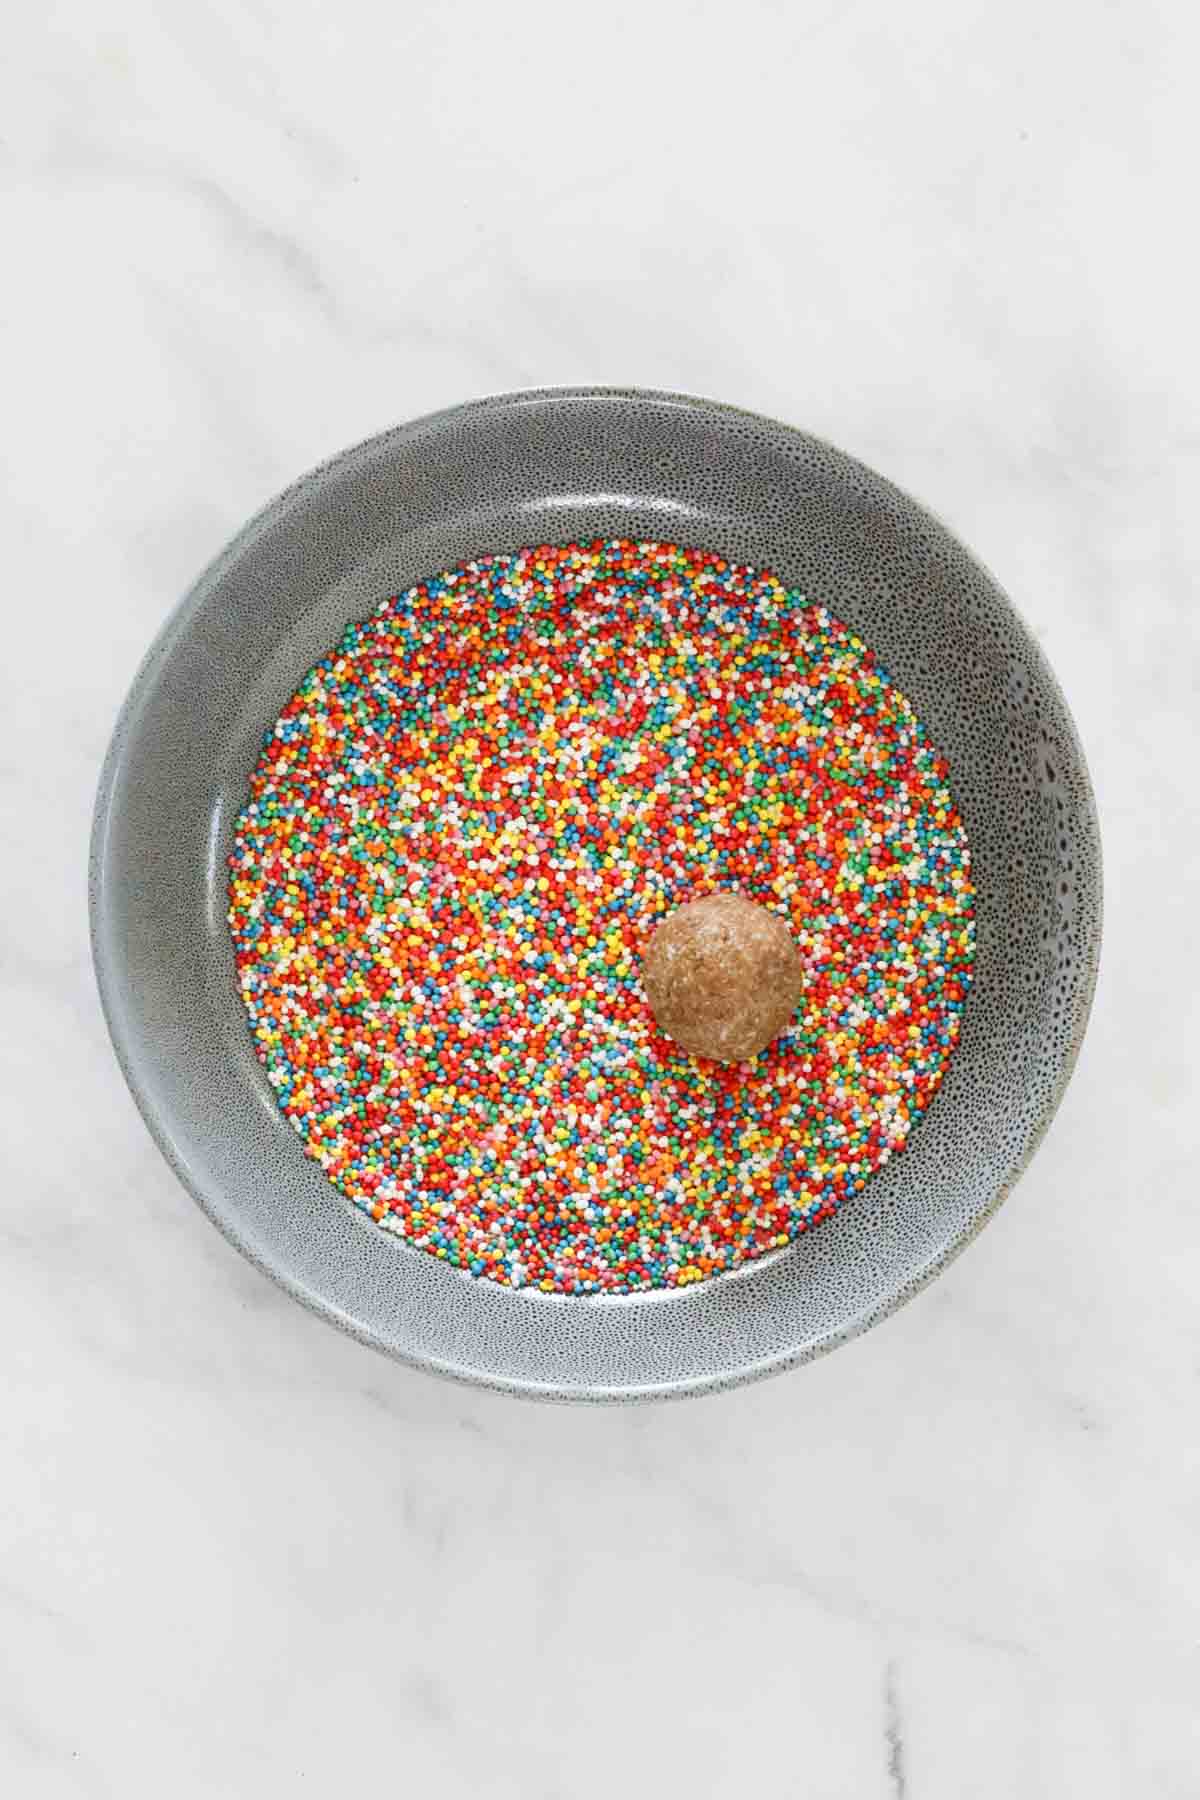 A round ball in a plate of coloured sprinkles.